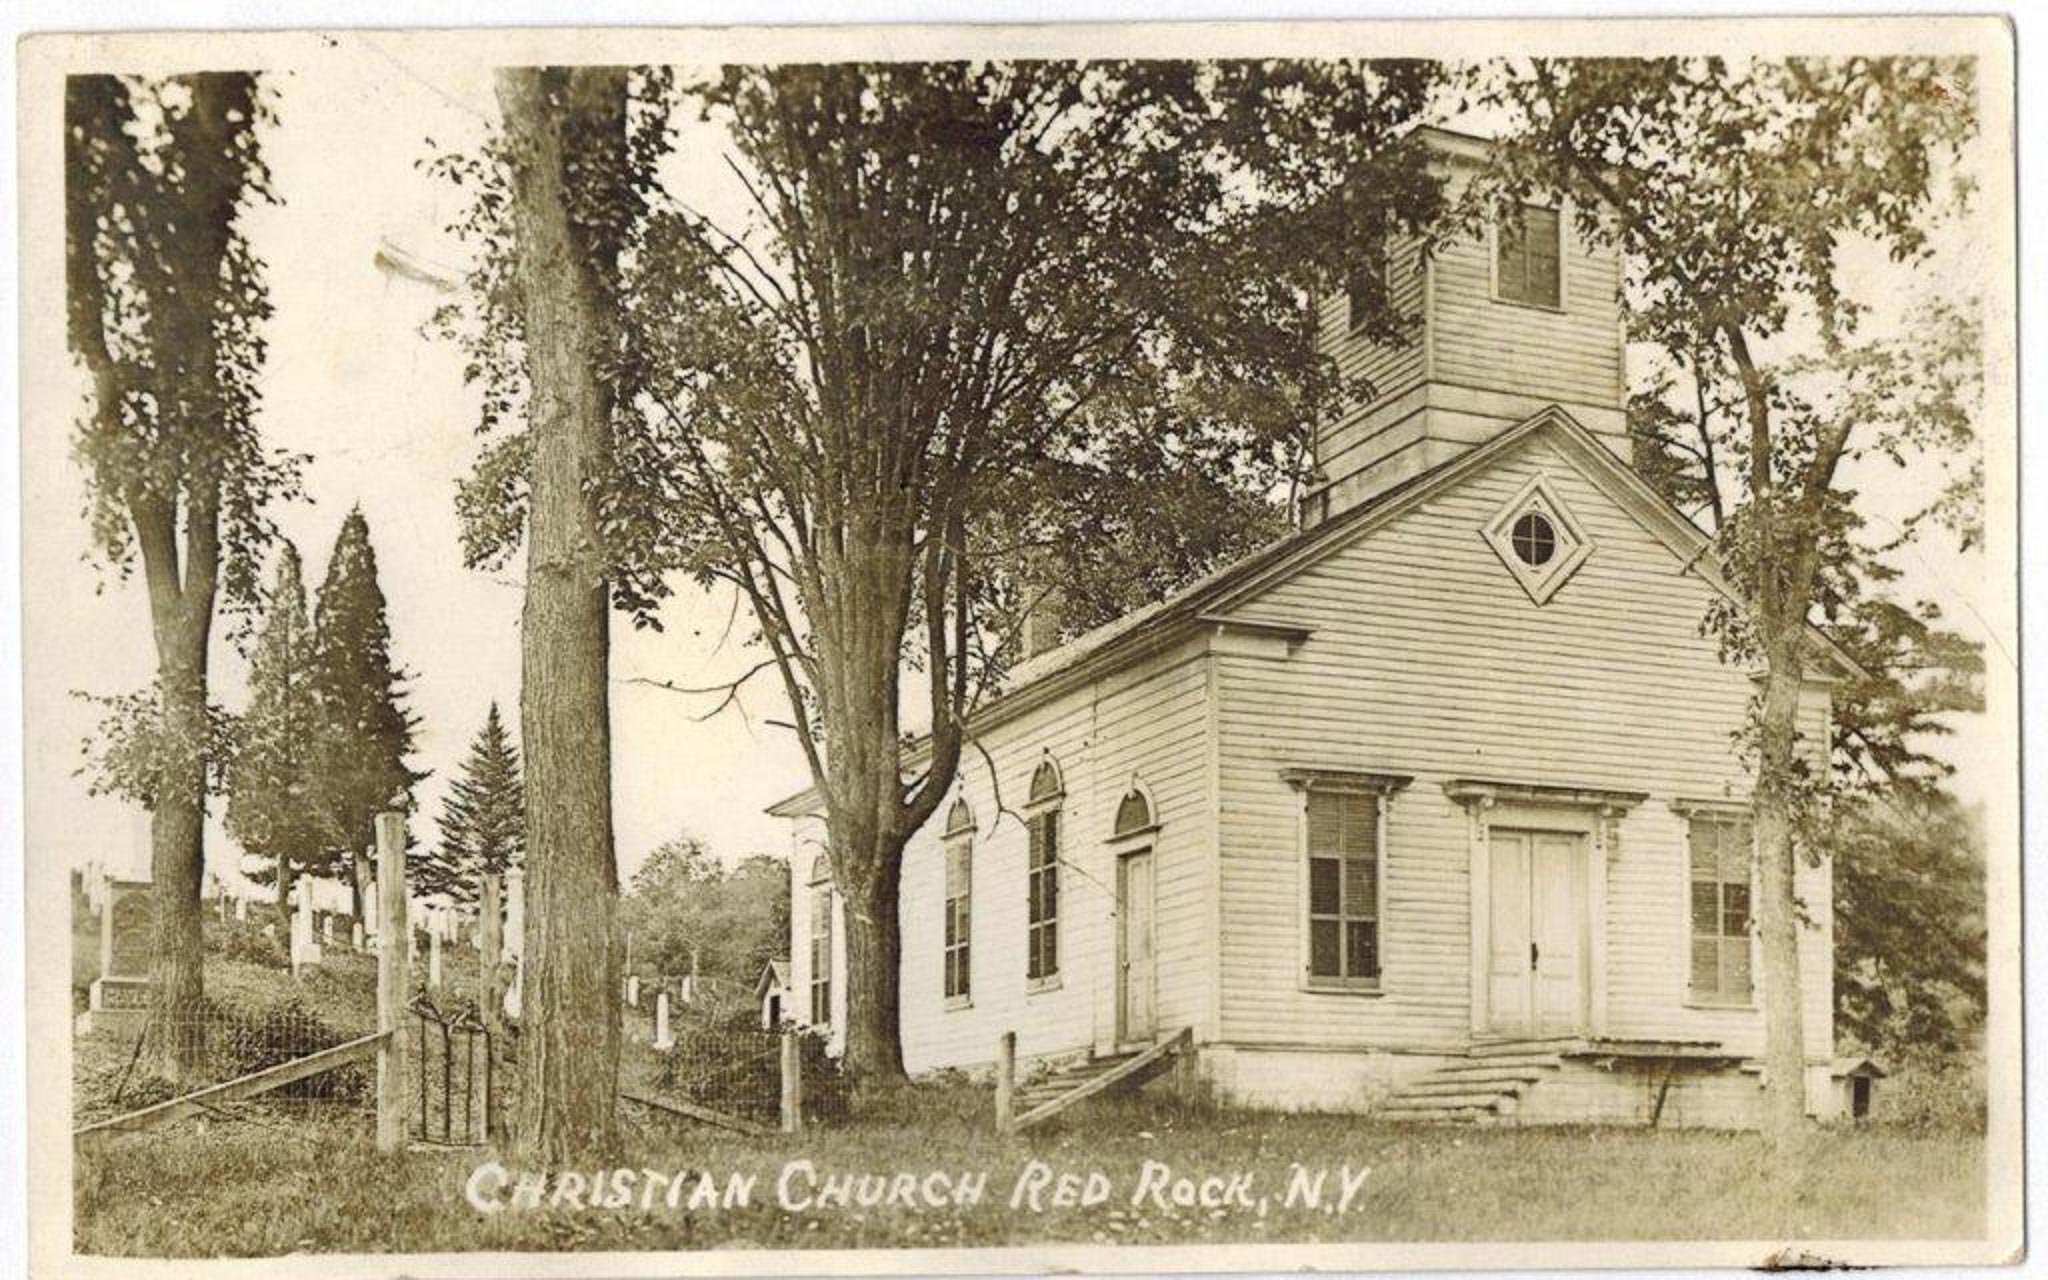 Postcard of the Red Rock Christian church